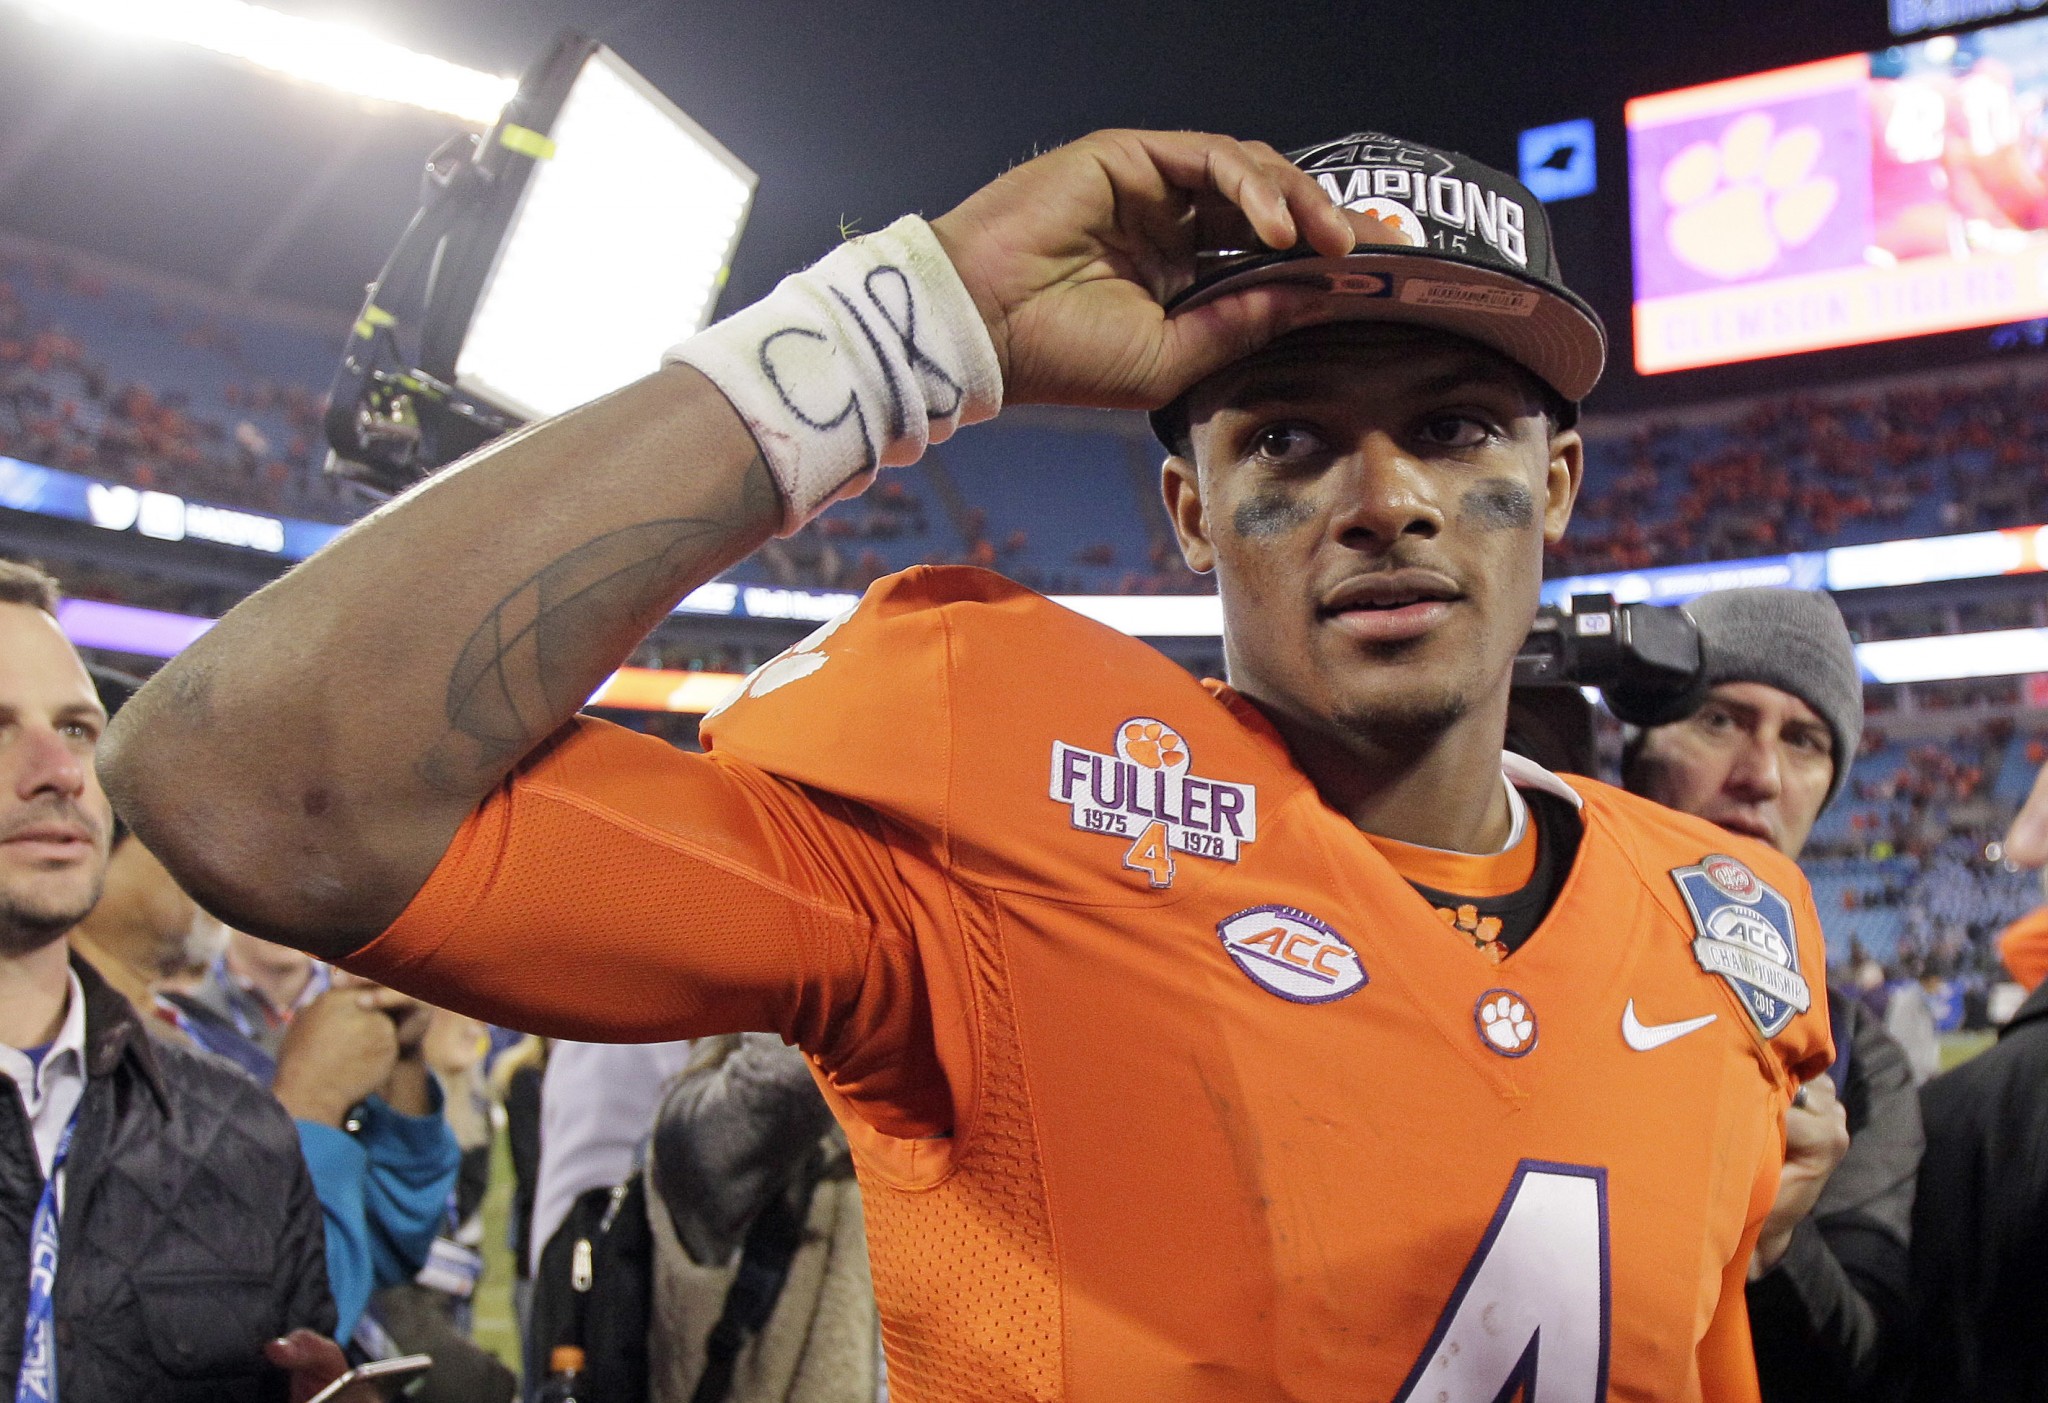 FILE - In this Dec. 6, 2015, file photo, Clemson quarterback Deshaun Watson celebrates after Clemson defeated North Carolina 45-37 in the Atlantic Coast Conference championship NCAA college football game in Charlotte, N.C. Watson and the Tigers are the preseason favorites to win the ACC. (AP Photo/Gerry Broome, File)